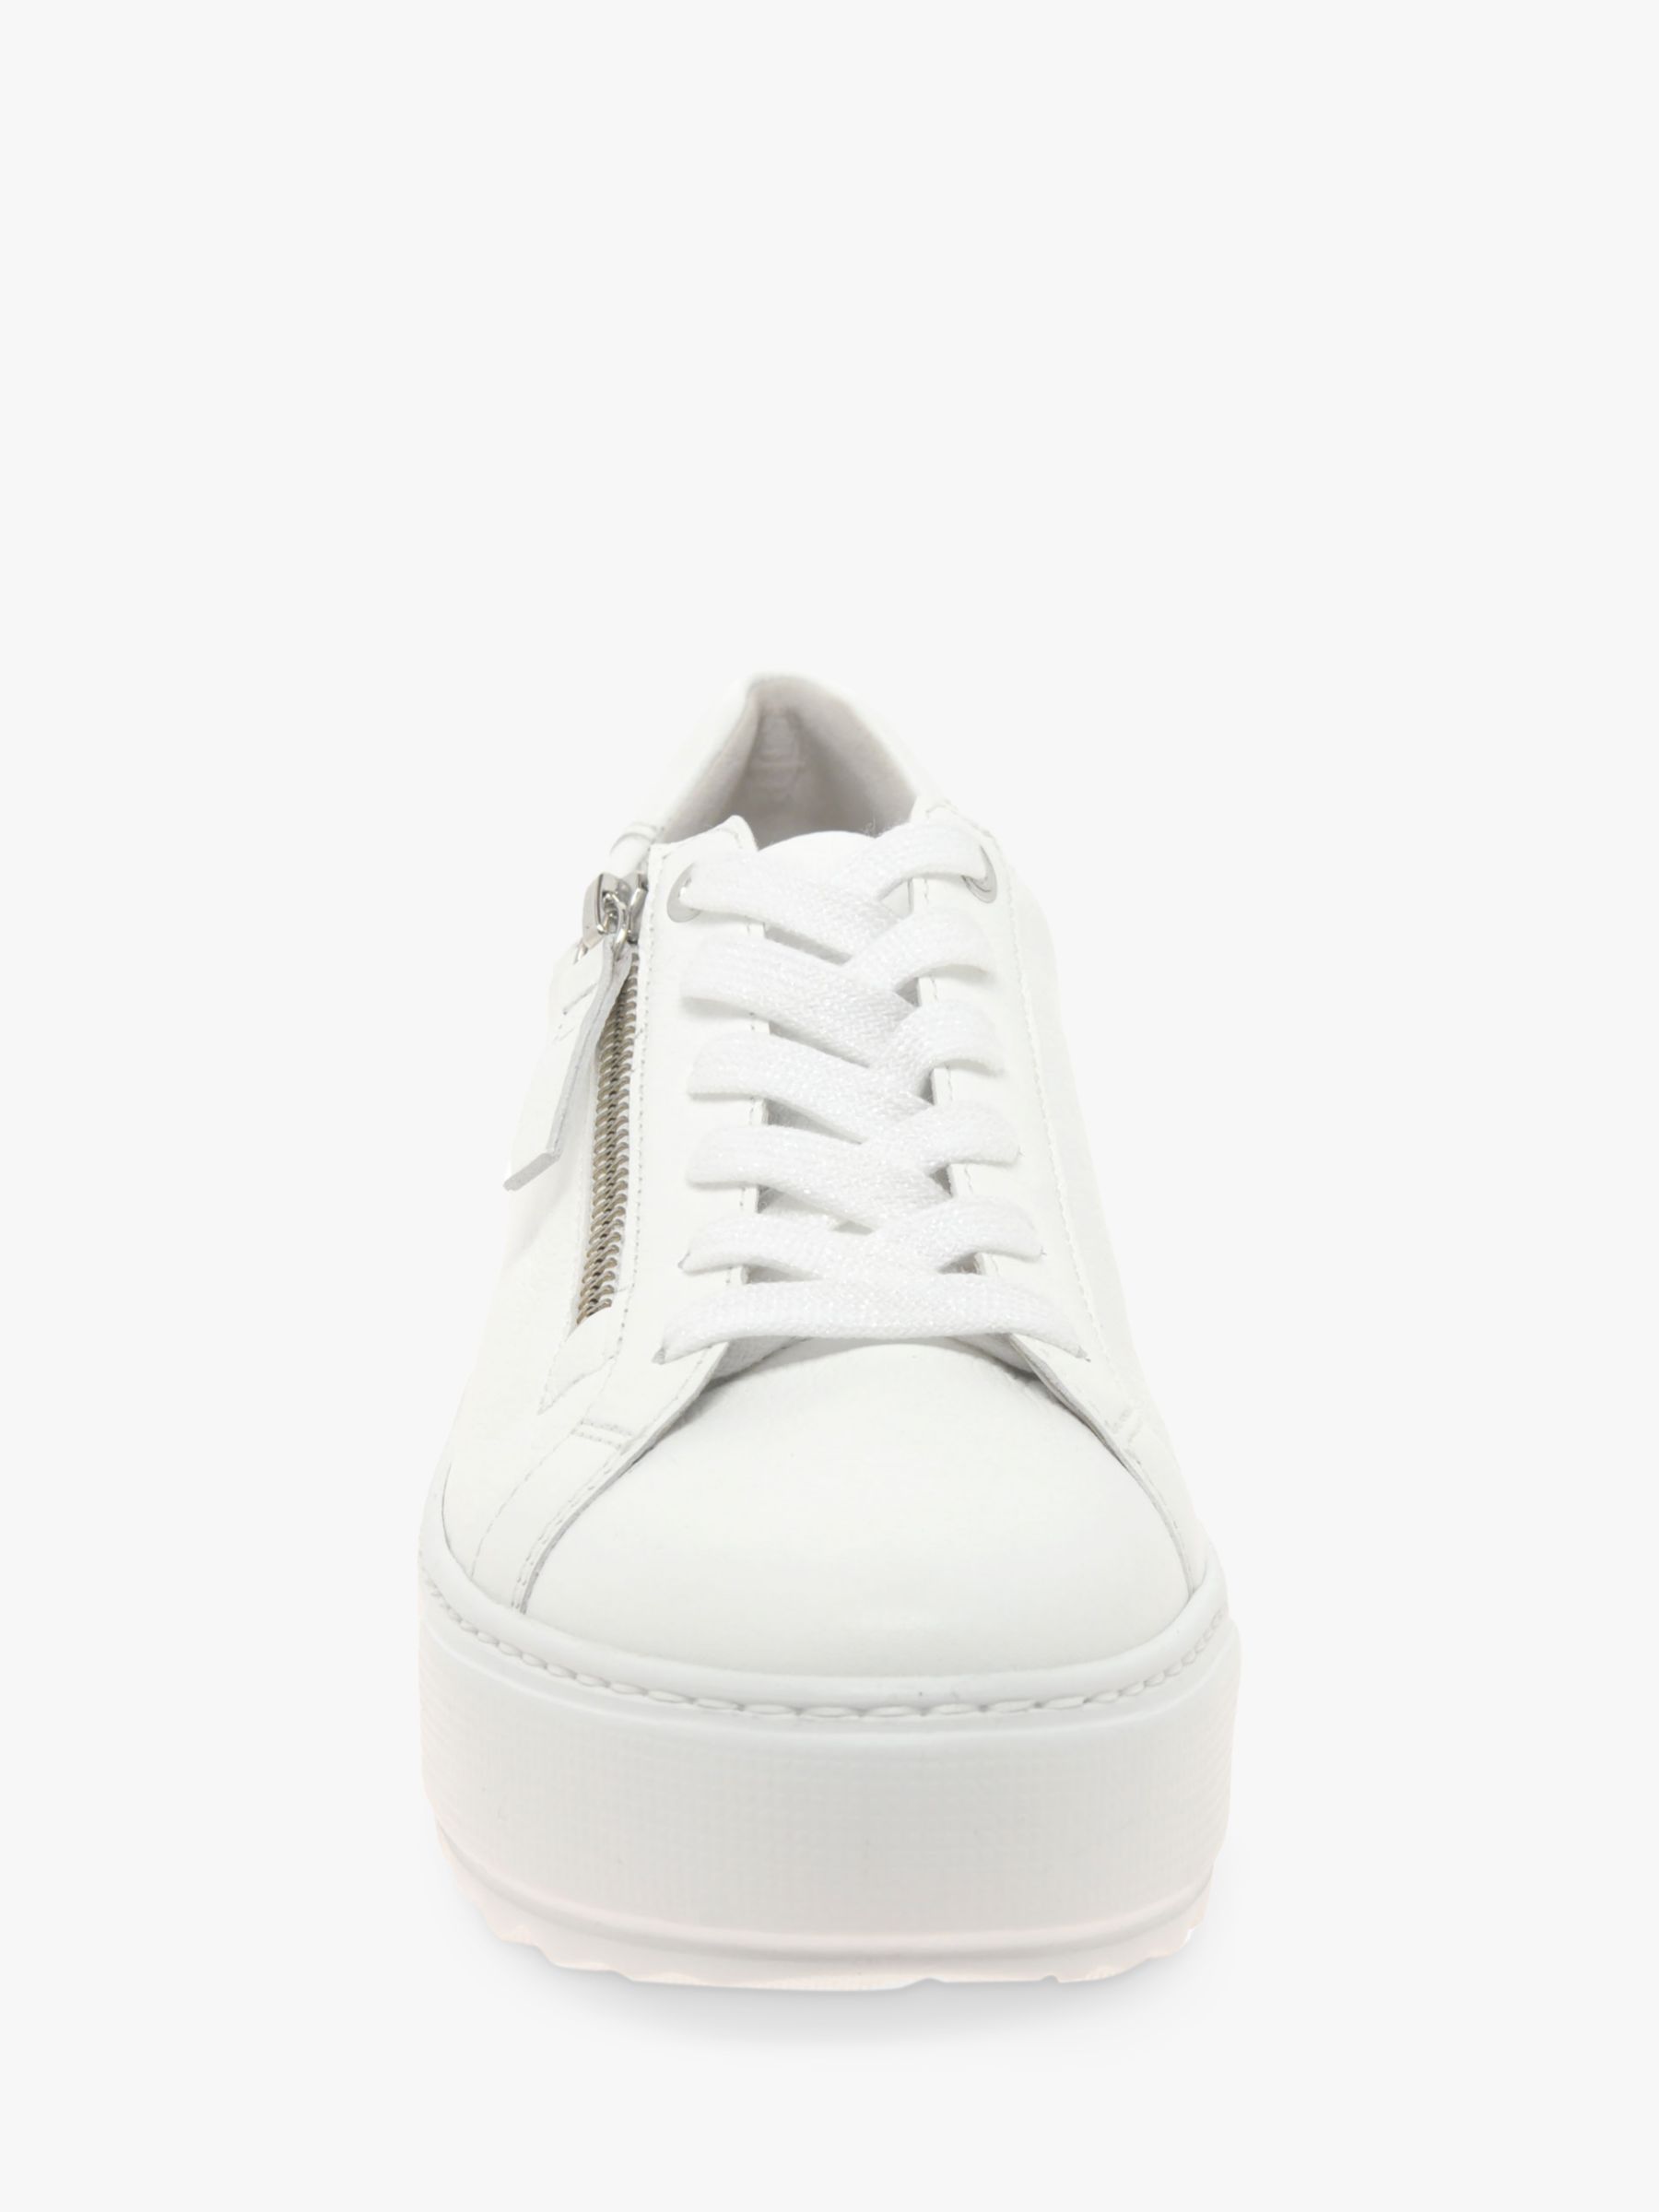 Gabor Heather Wide Fit Leather Flatform Trainers, White, 3